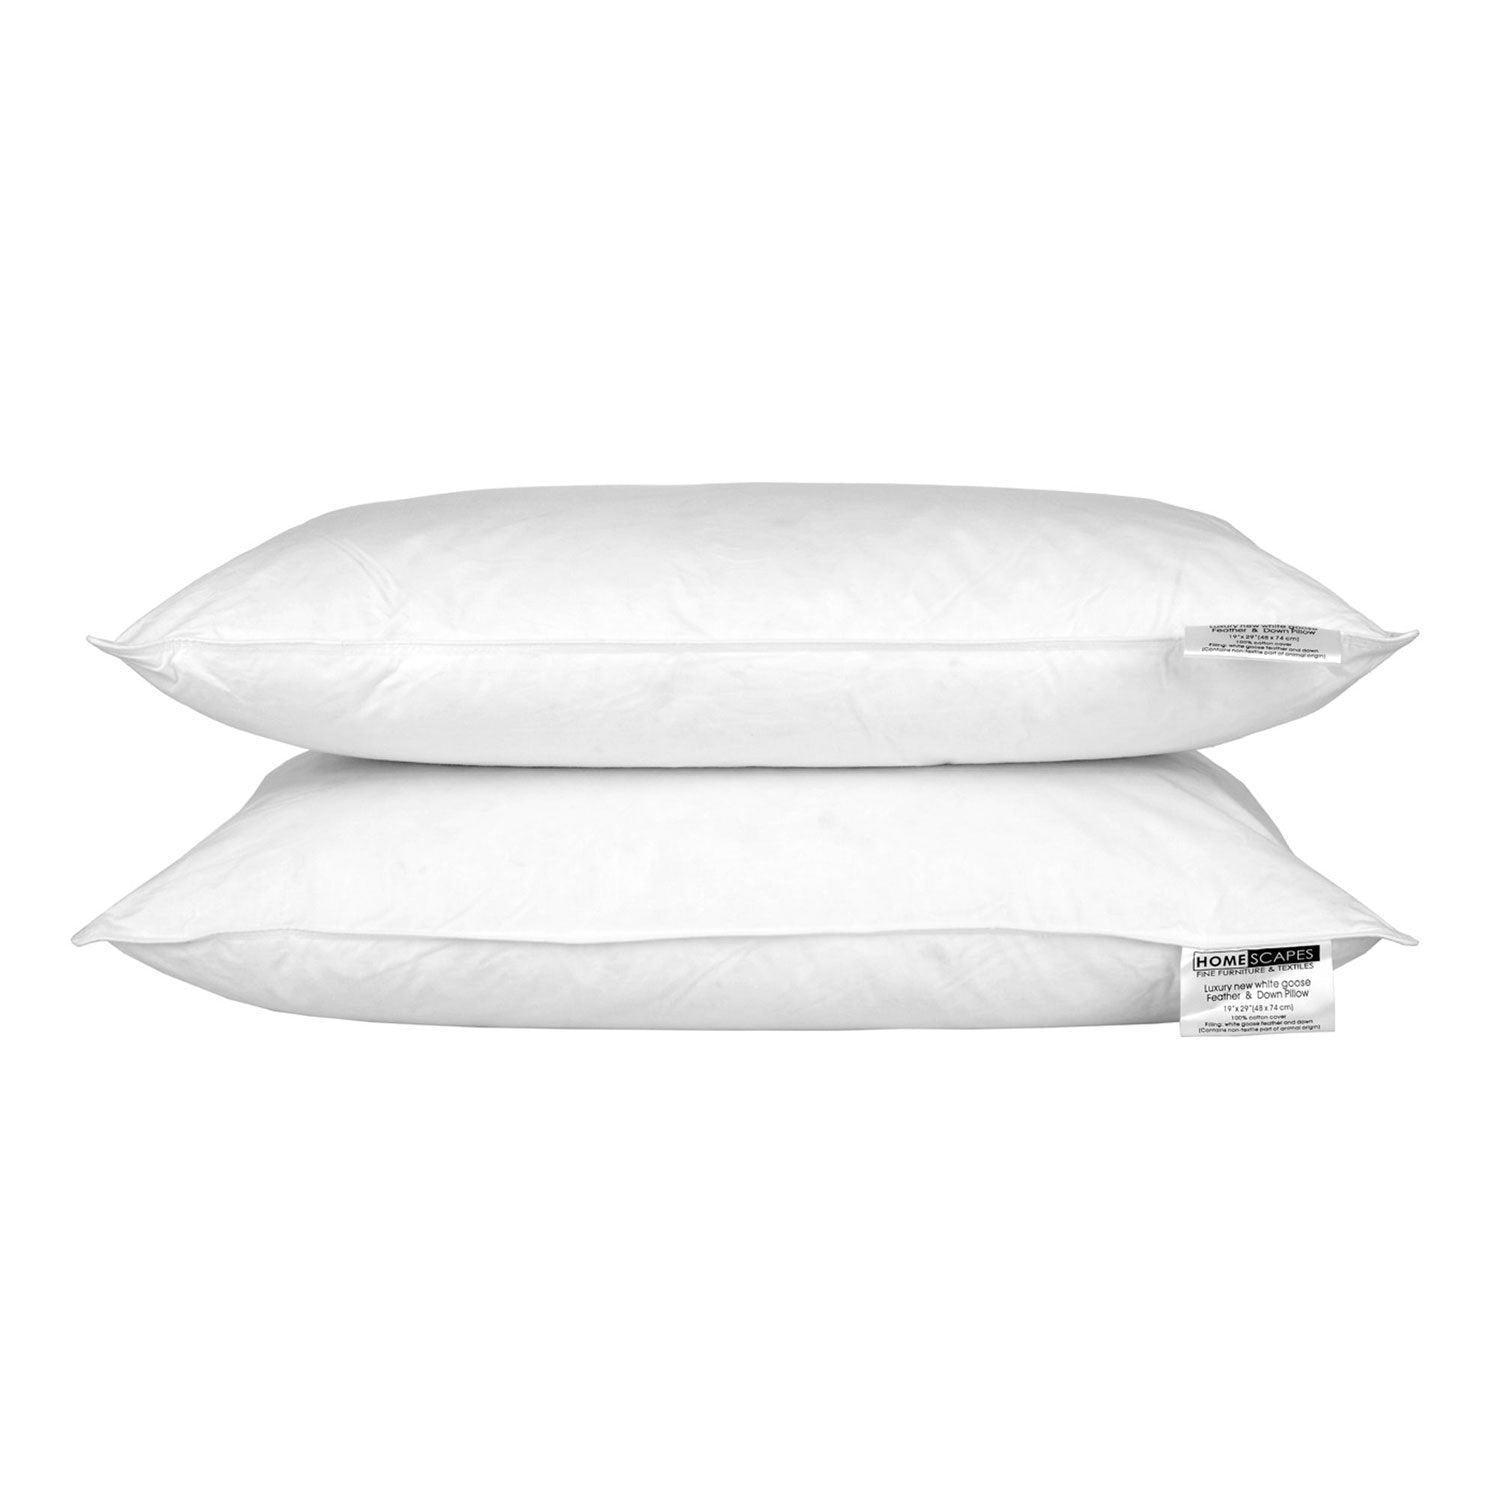 HOMESCAPES - White Goose Feather & Down Pillow Pair - Department Store Quality - Wash at Home Range - Medium/Soft Firmness - Hypo Allergenic & Anti Dust Mites - RDS Certified.